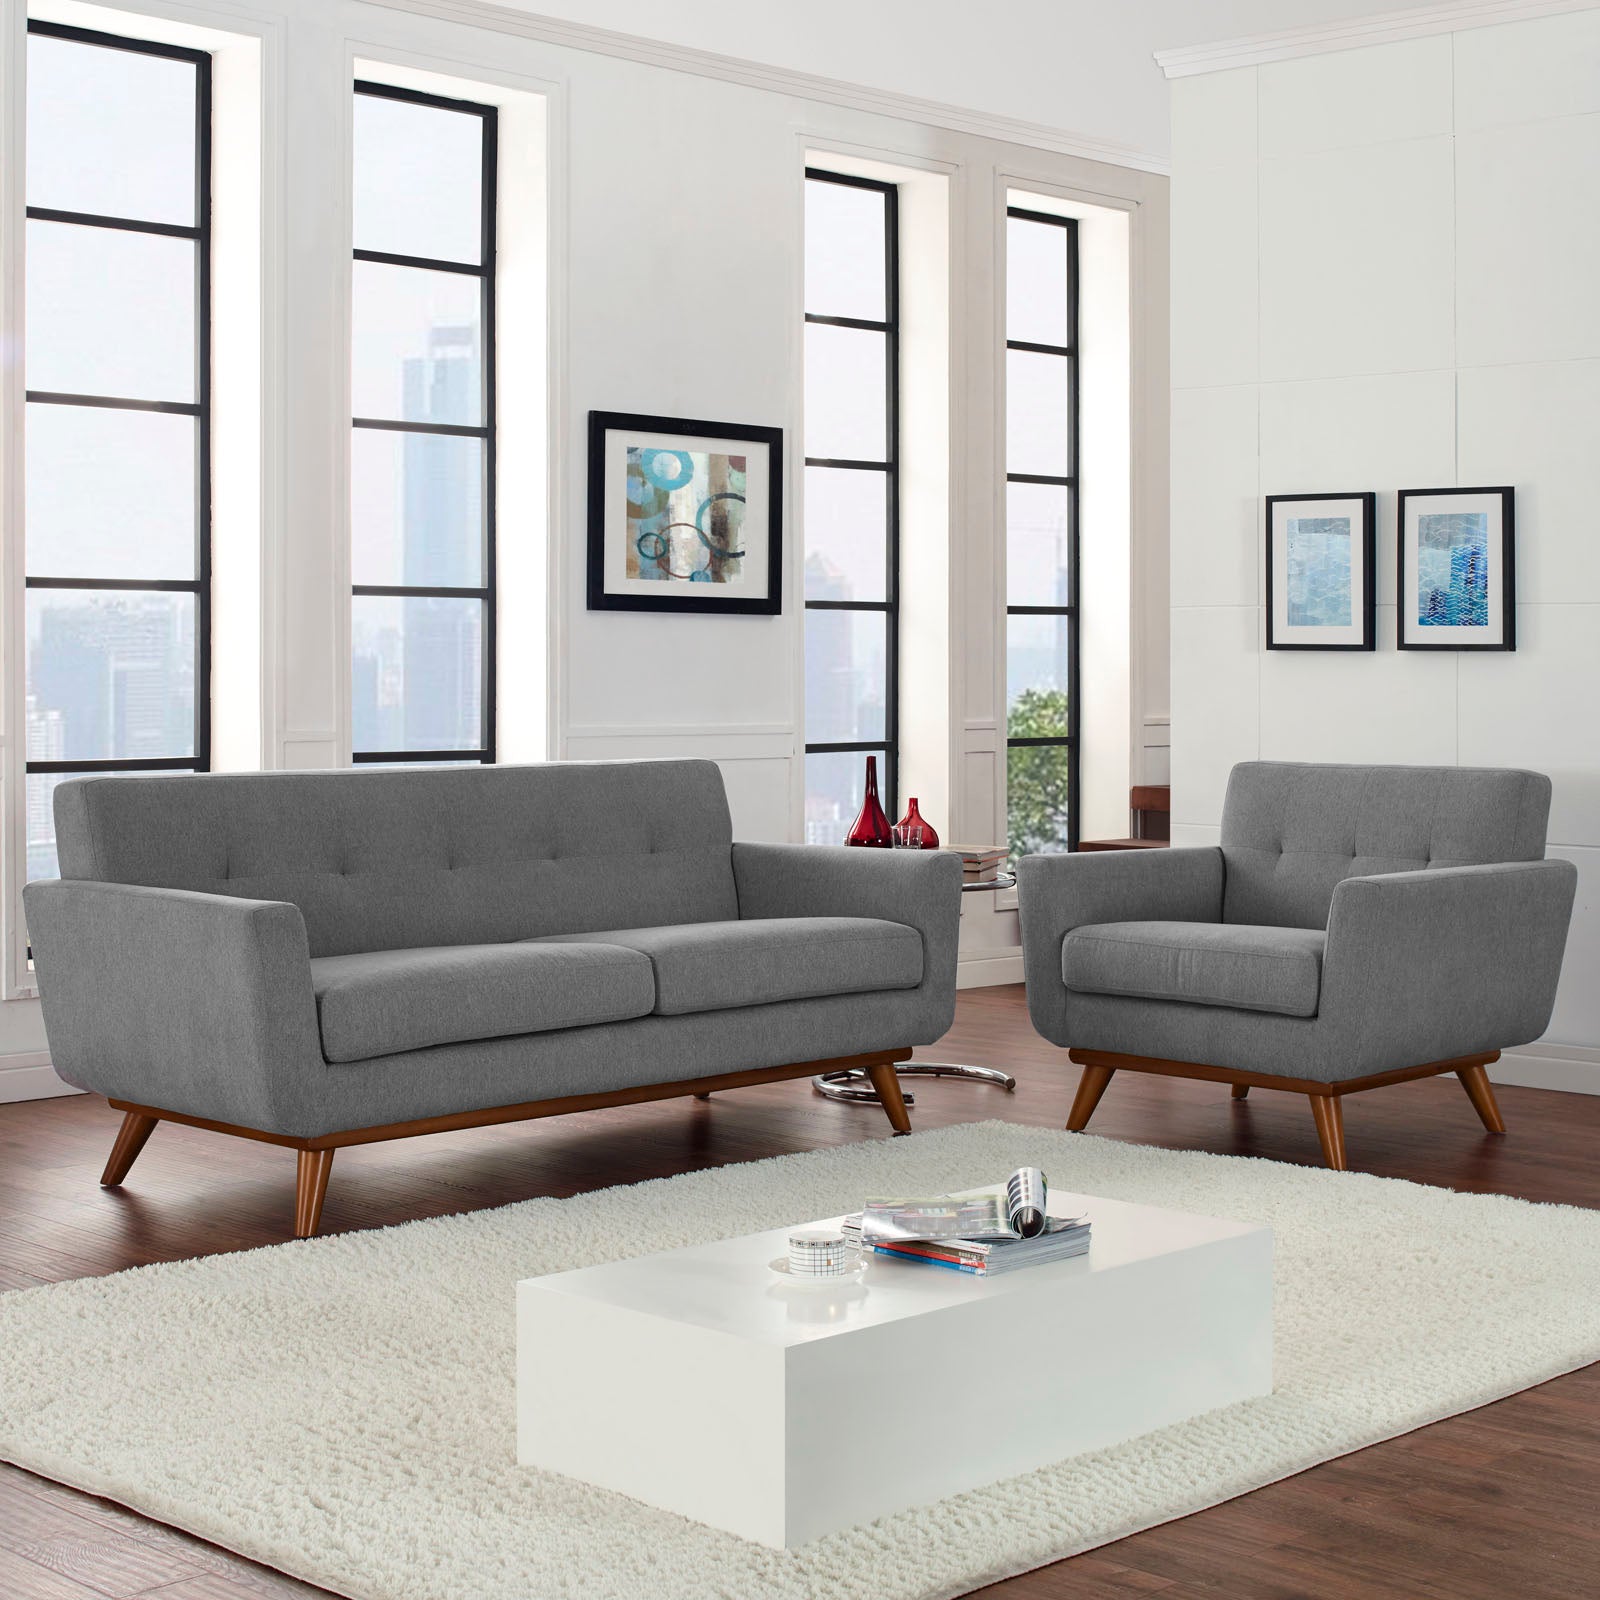 Engage Armchair and Loveseat Set of 2